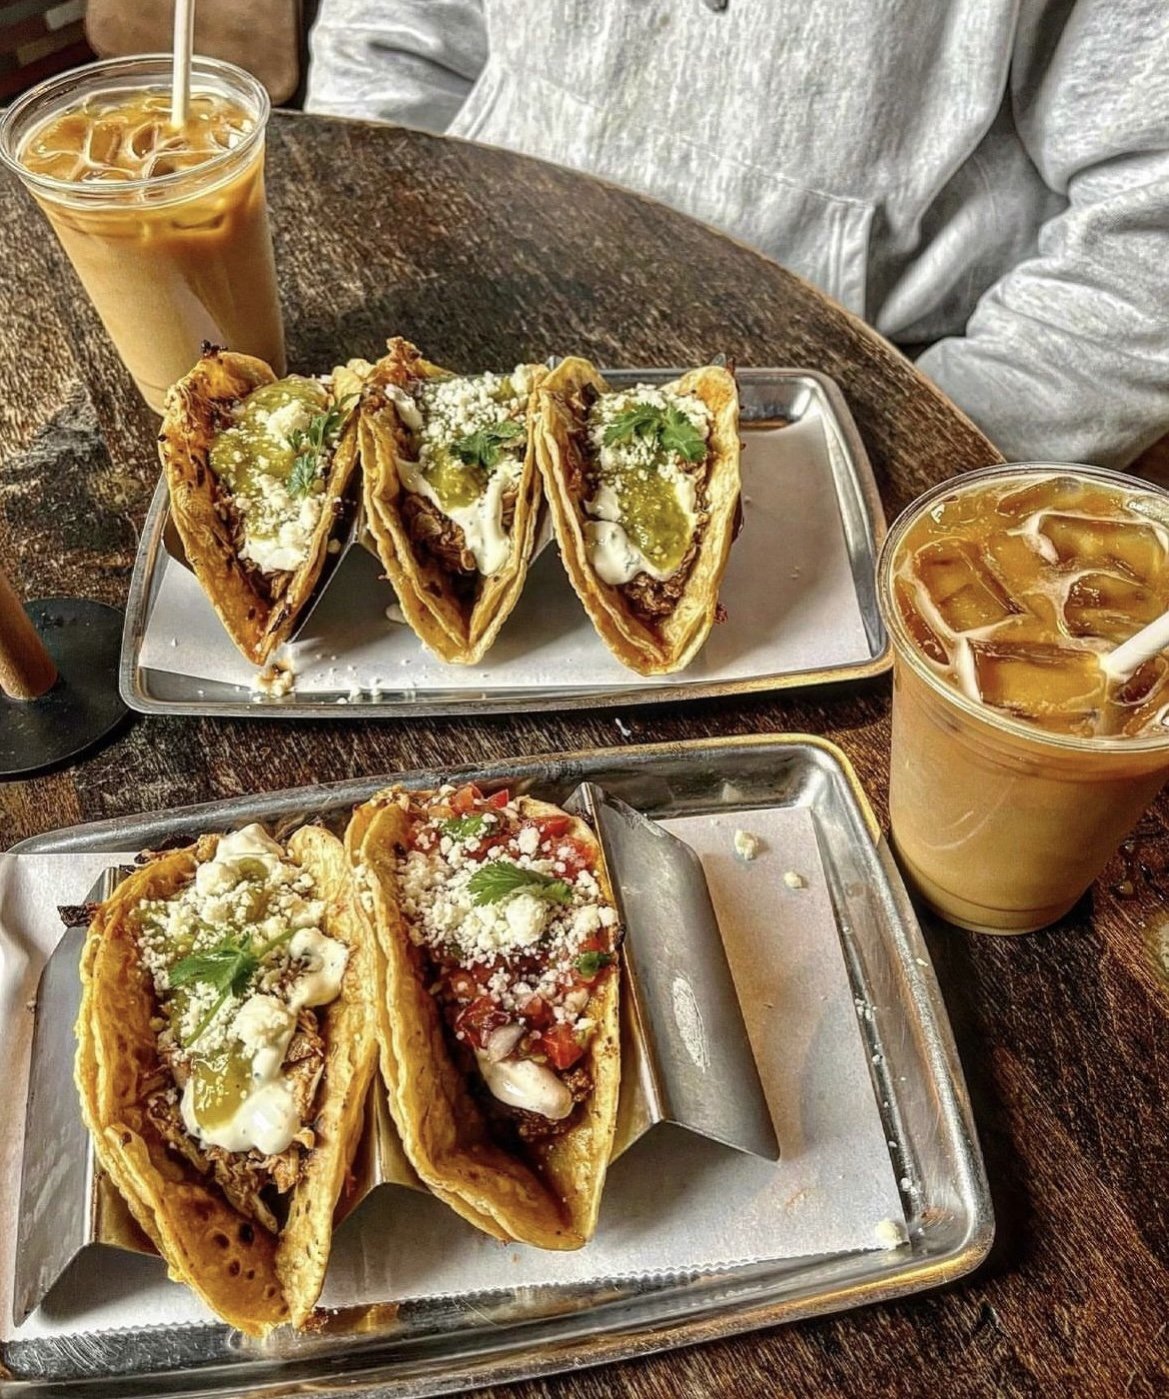 Looking for Friday night plans? Look no further! Join us for Lattes and Lonestars Happy Hour from 6-9PM. Enjoy $2 lattes (iced or hot) and $2 Lonestar beers. PLUS treat yourself to our tasty tacos. Let's cheers for the weekend! 🍻☕🌮 

#savannahga #v